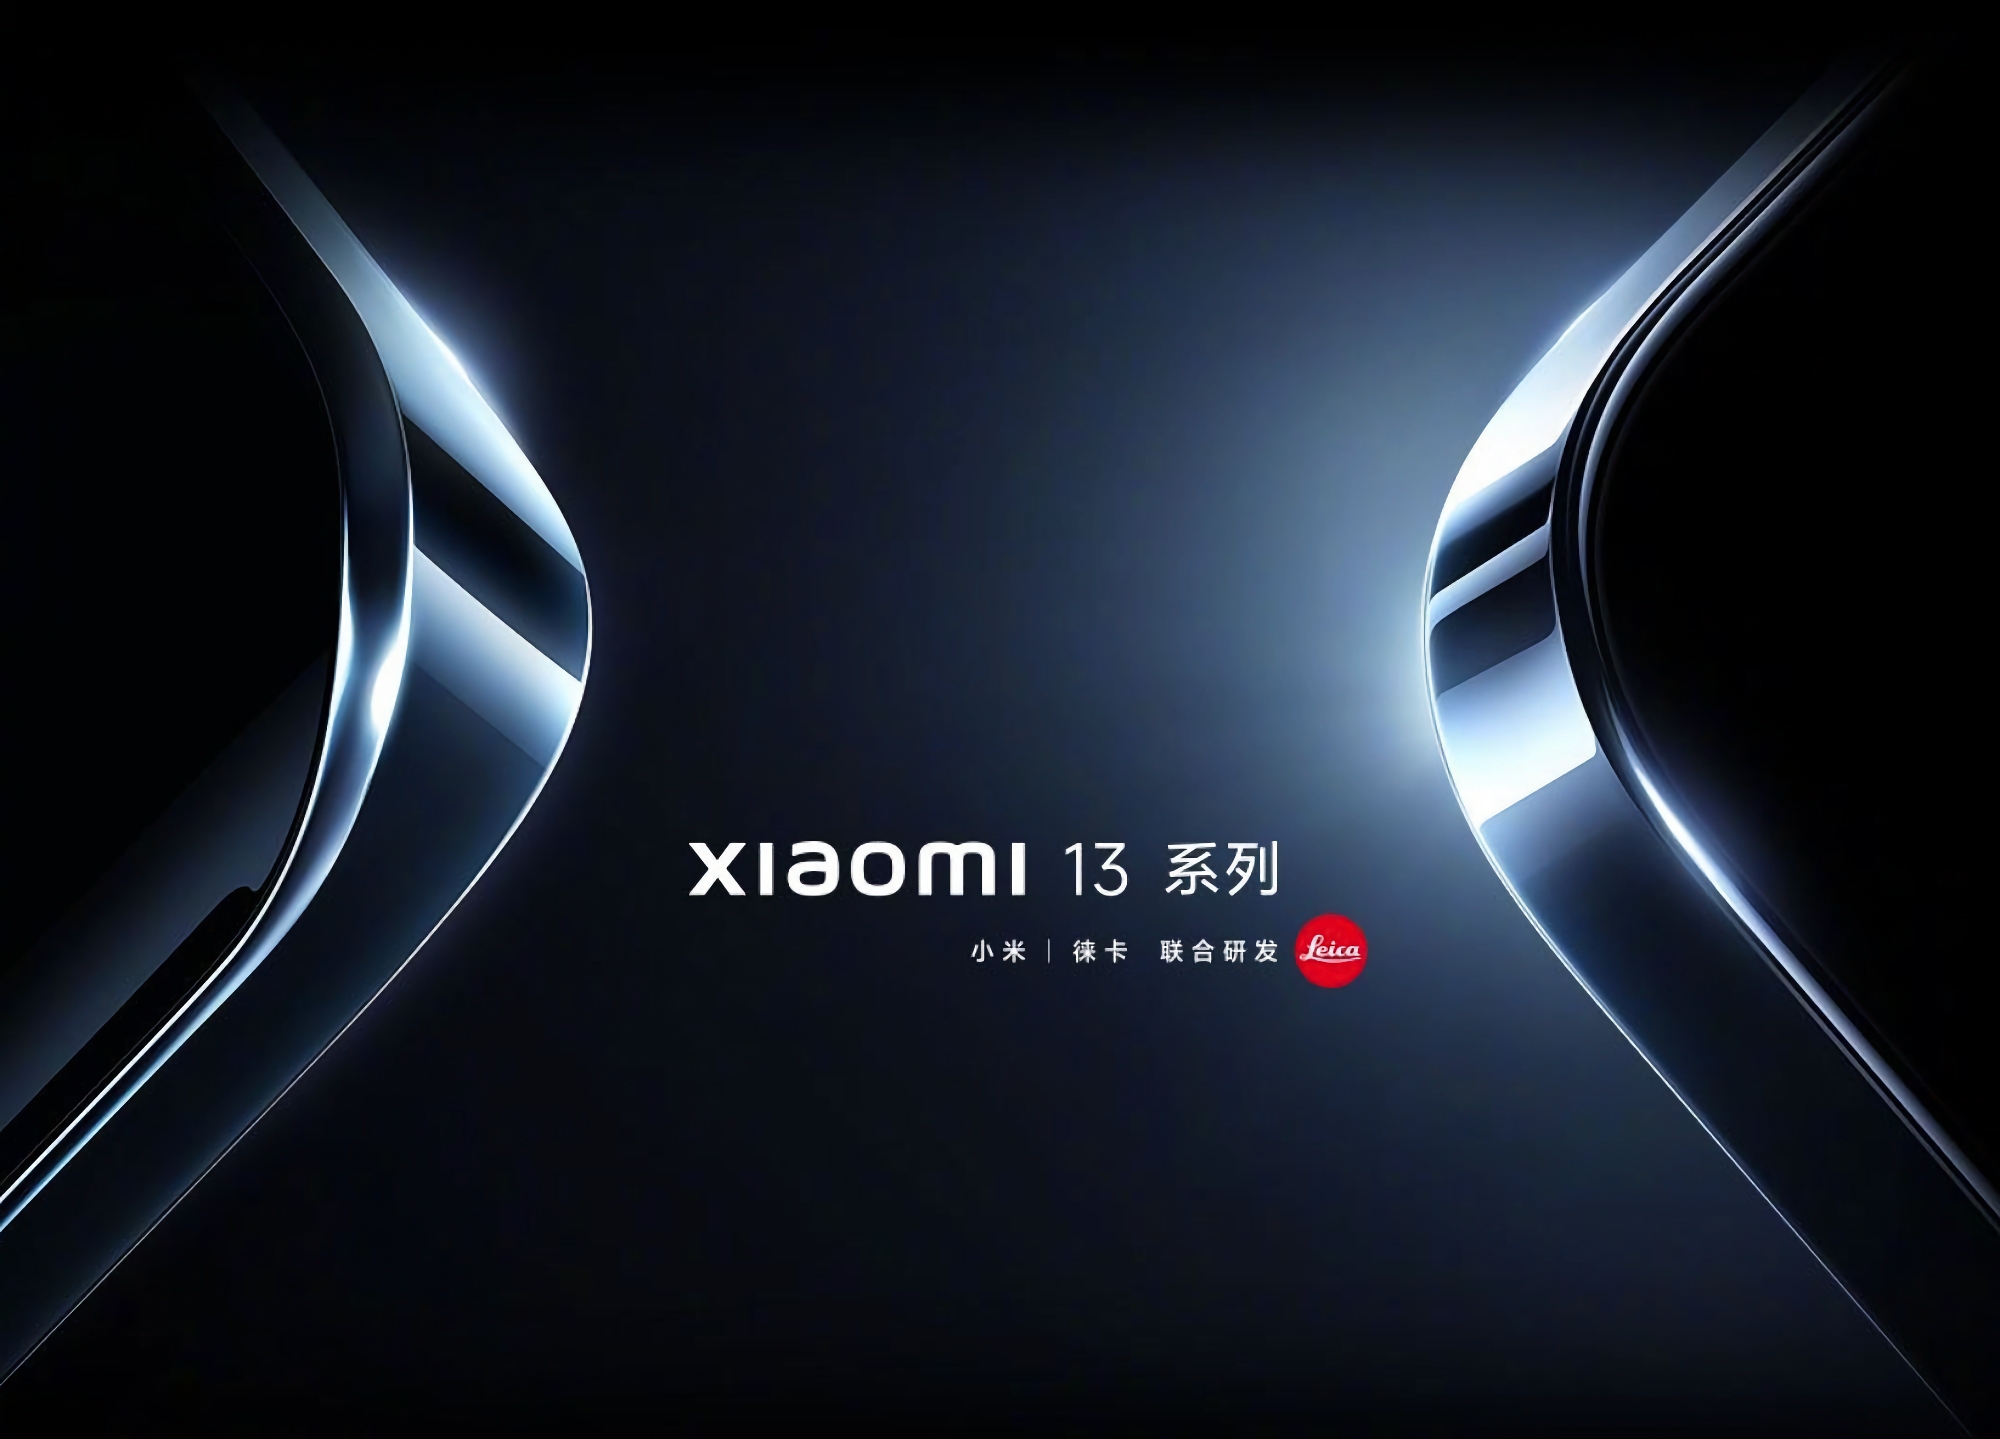 Xiaomi postponed the presentation of the Xiaomi 13 and Xiaomi 13 Pro flagships because of the death of former Chinese leader Jiang Zemin